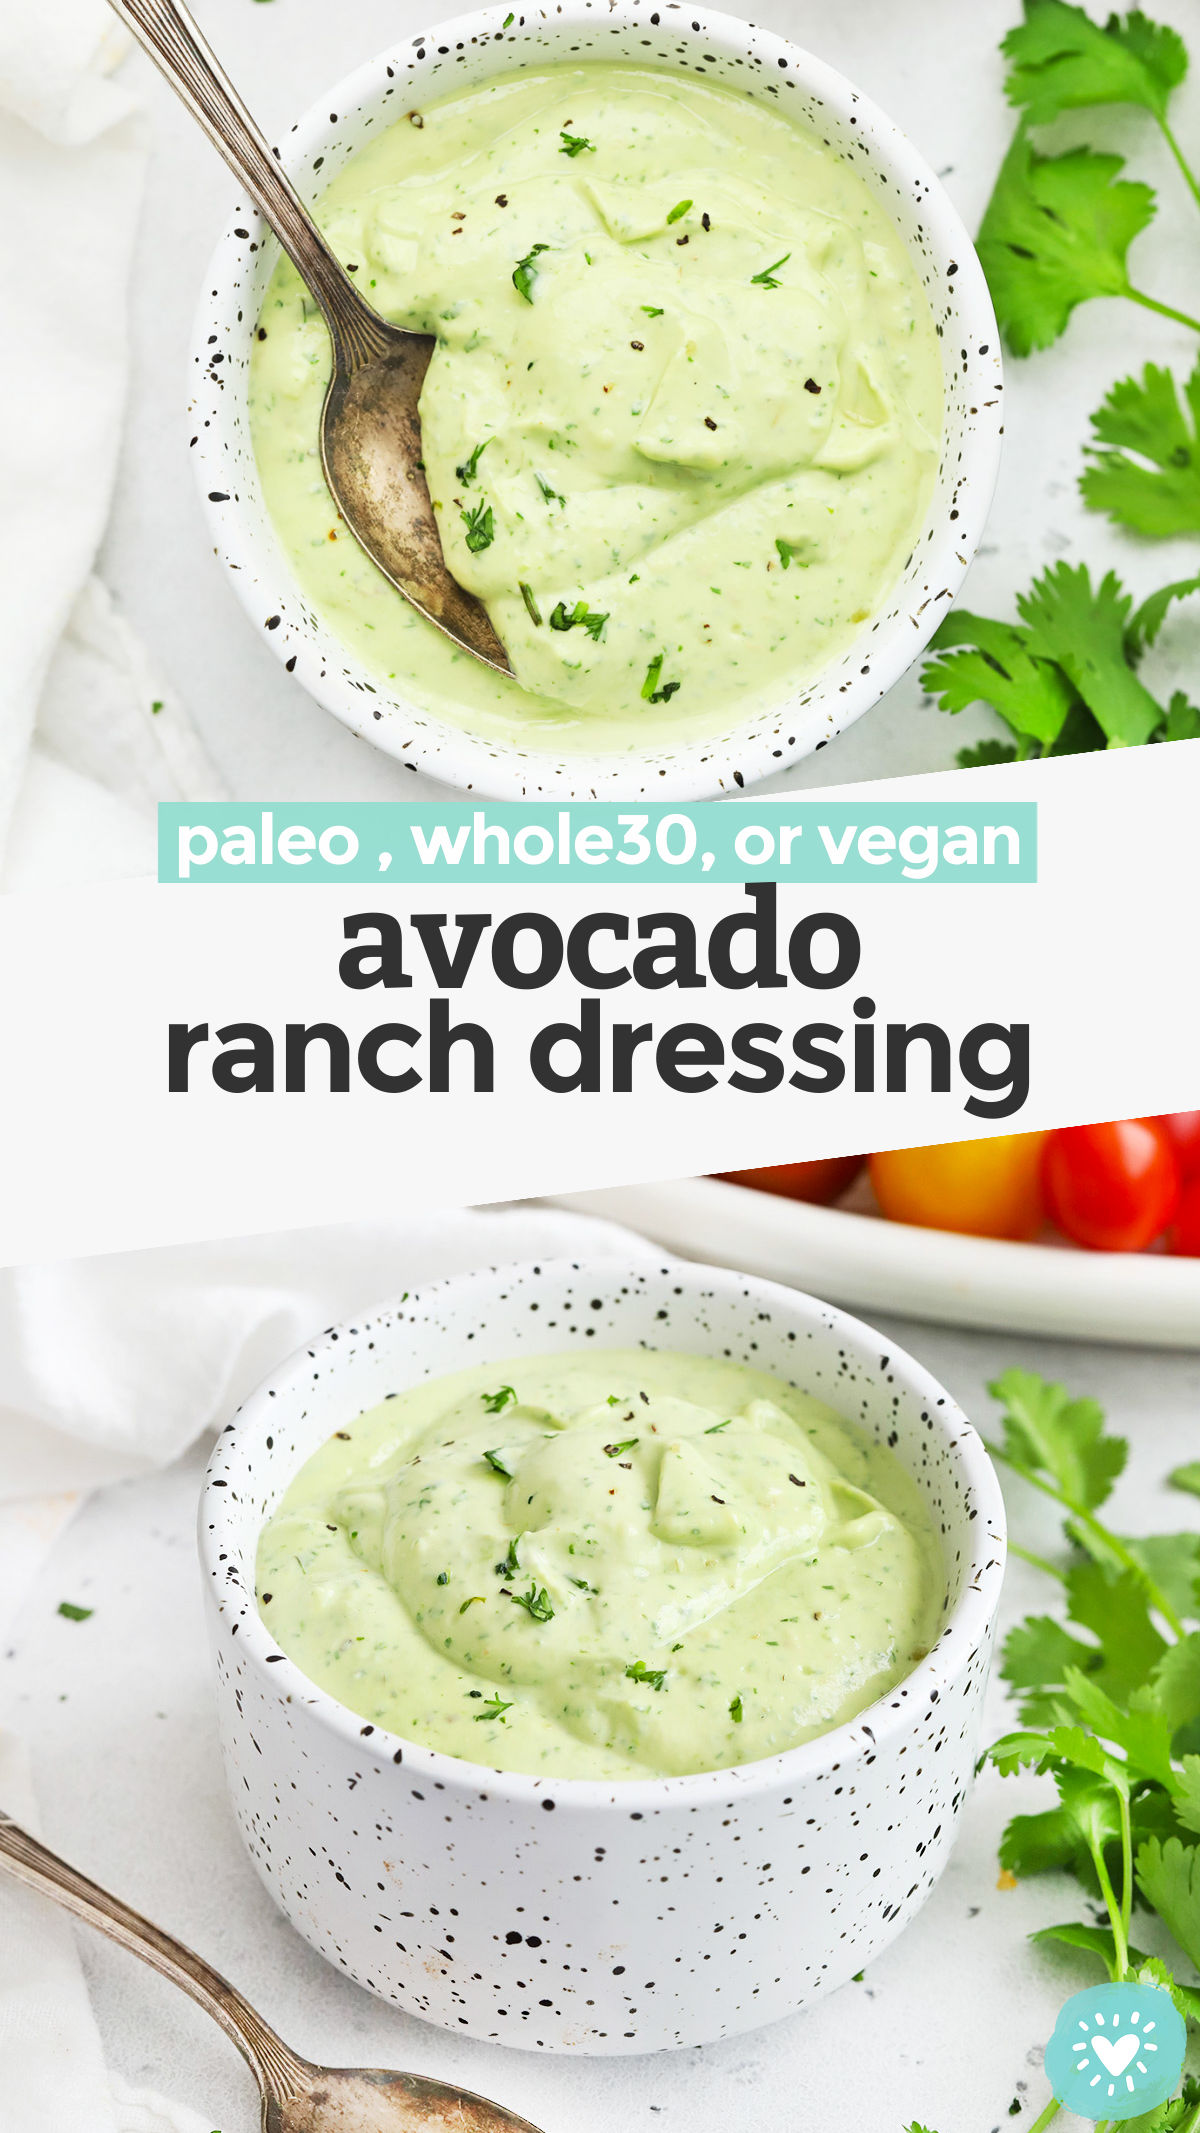 Creamy Avocado Ranch - This avocado ranch dressing recipe is everything I love about ranch dressing and avocados combined! It's an awesome dip for veggies, addition to tacos, or topping for salads. // Paleo Avocado Ranch // Vegan Avocado Ranch // Avocado Ranch Dip // Whole30 Avocado Ranch #paleoranch #avocadoranch #healthydip #avocado